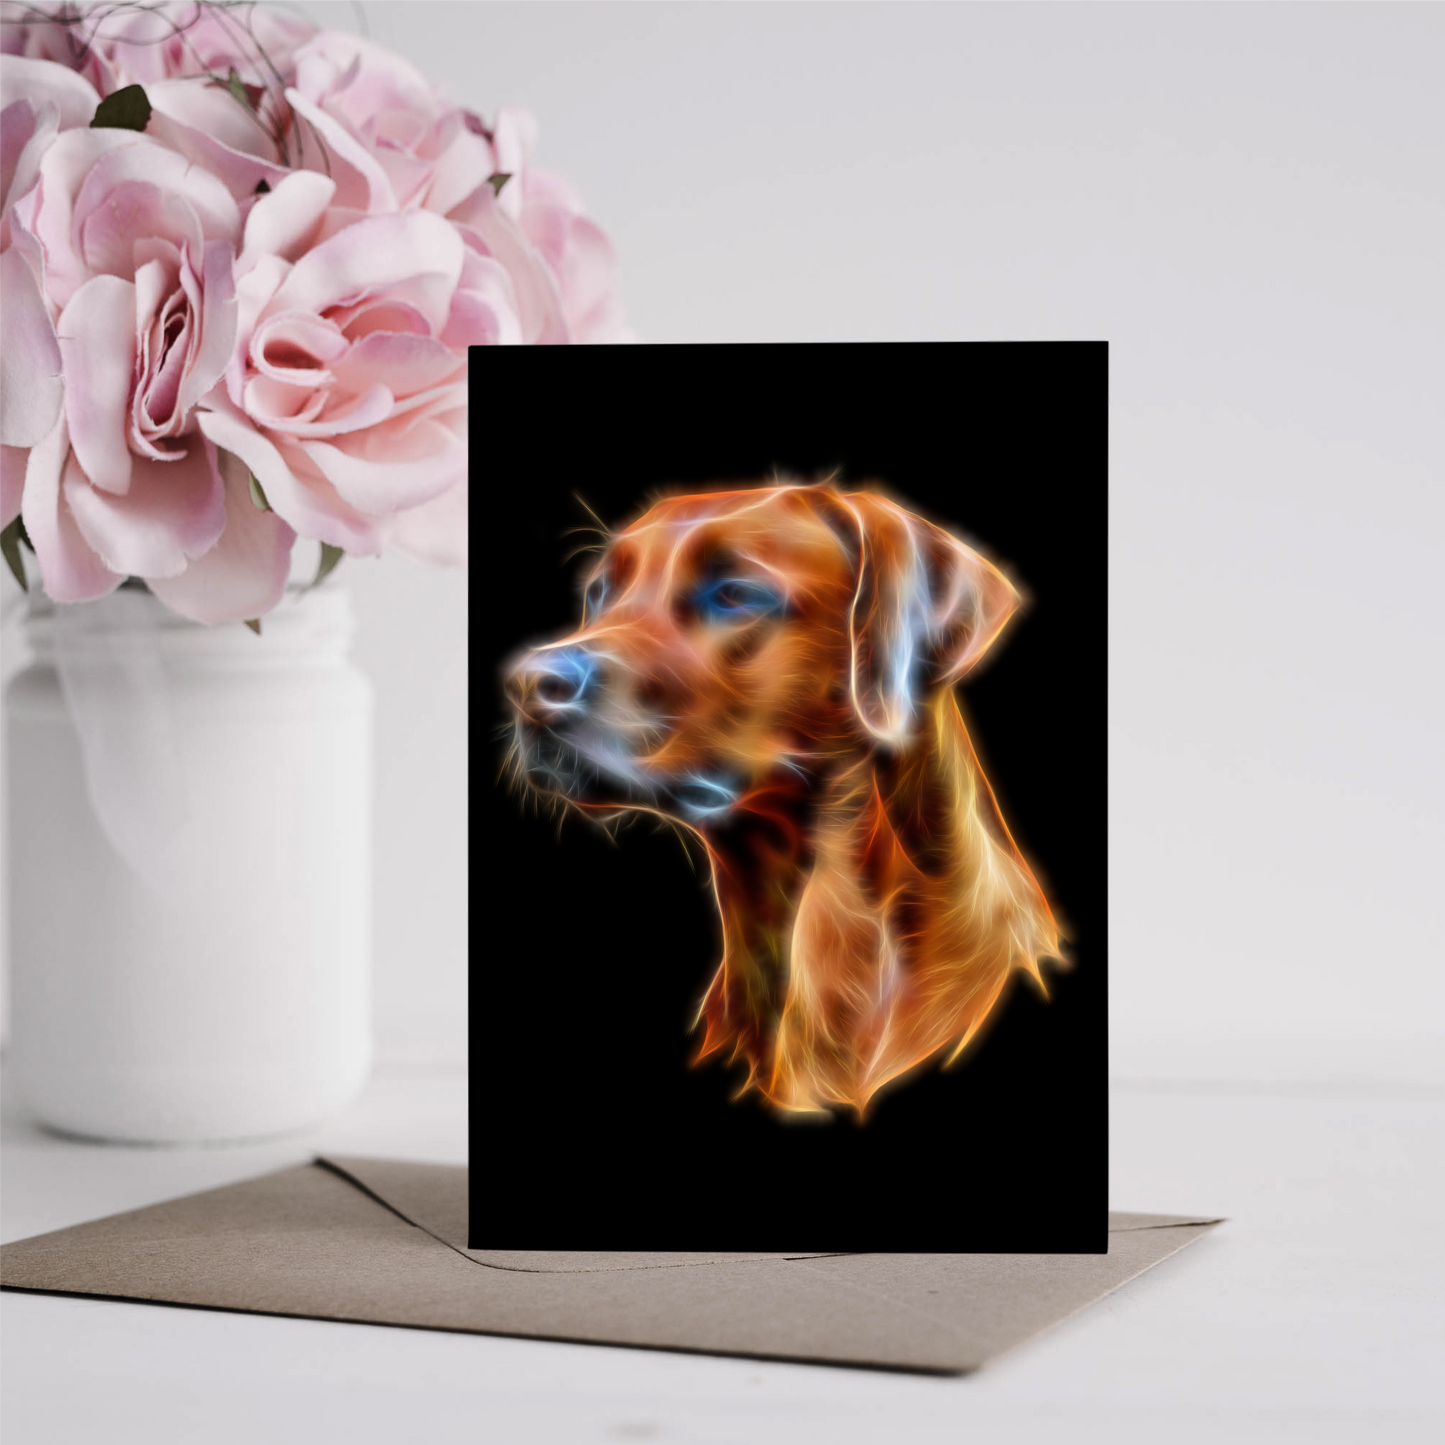 Rhodesian Ridgeback Greeting Card Blank Inside for Birthdays or any other Occasion